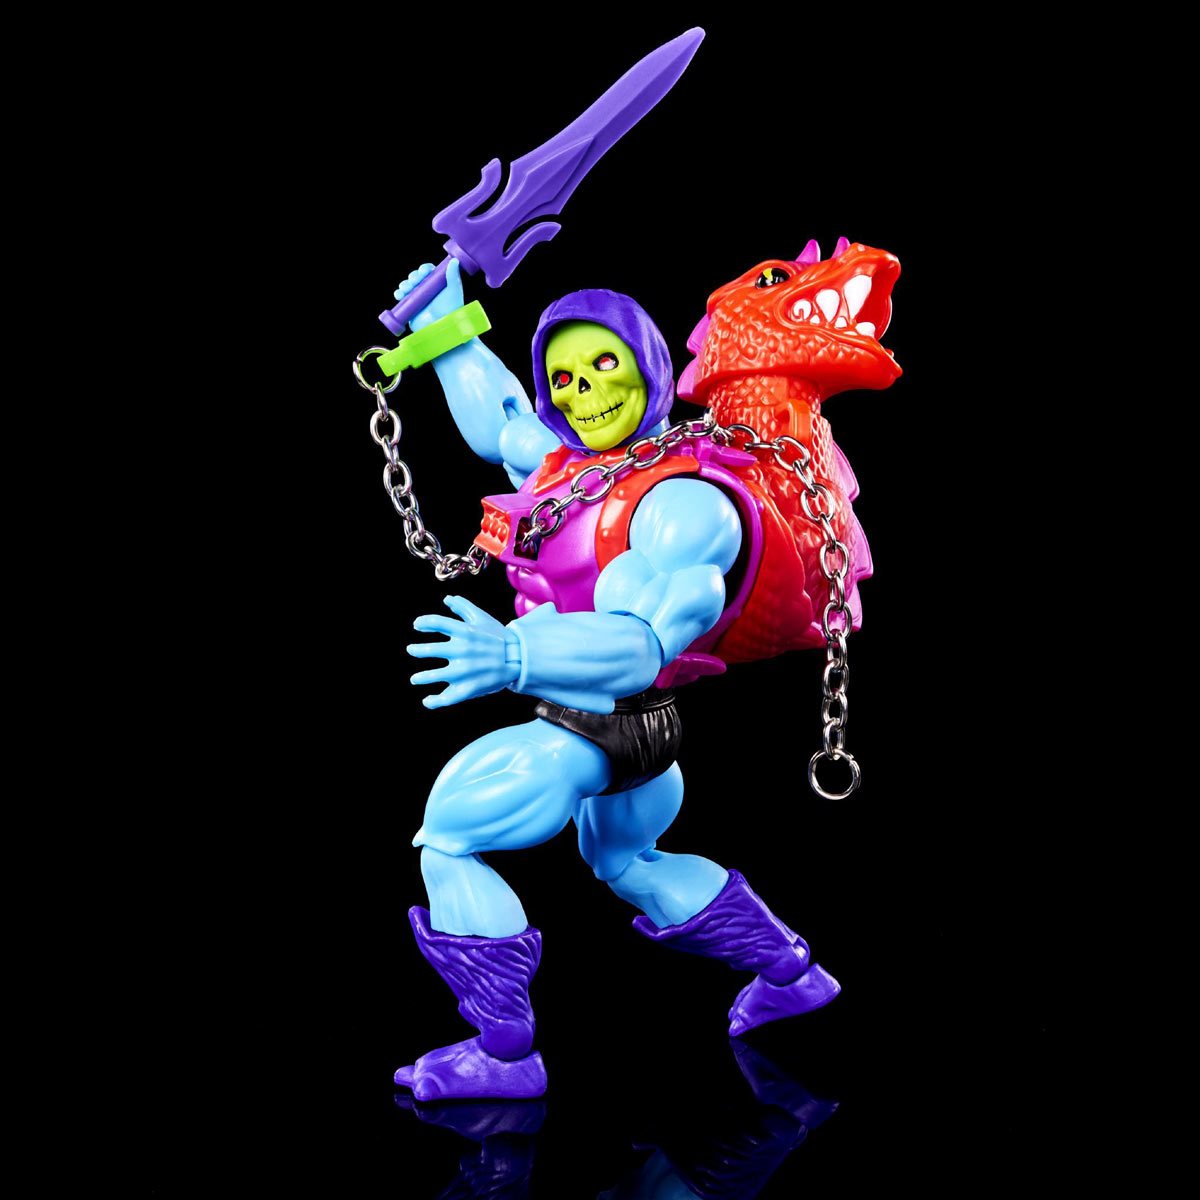 Masters of the Universe Dragon Blaster Skeletor Deluxe Action Figure